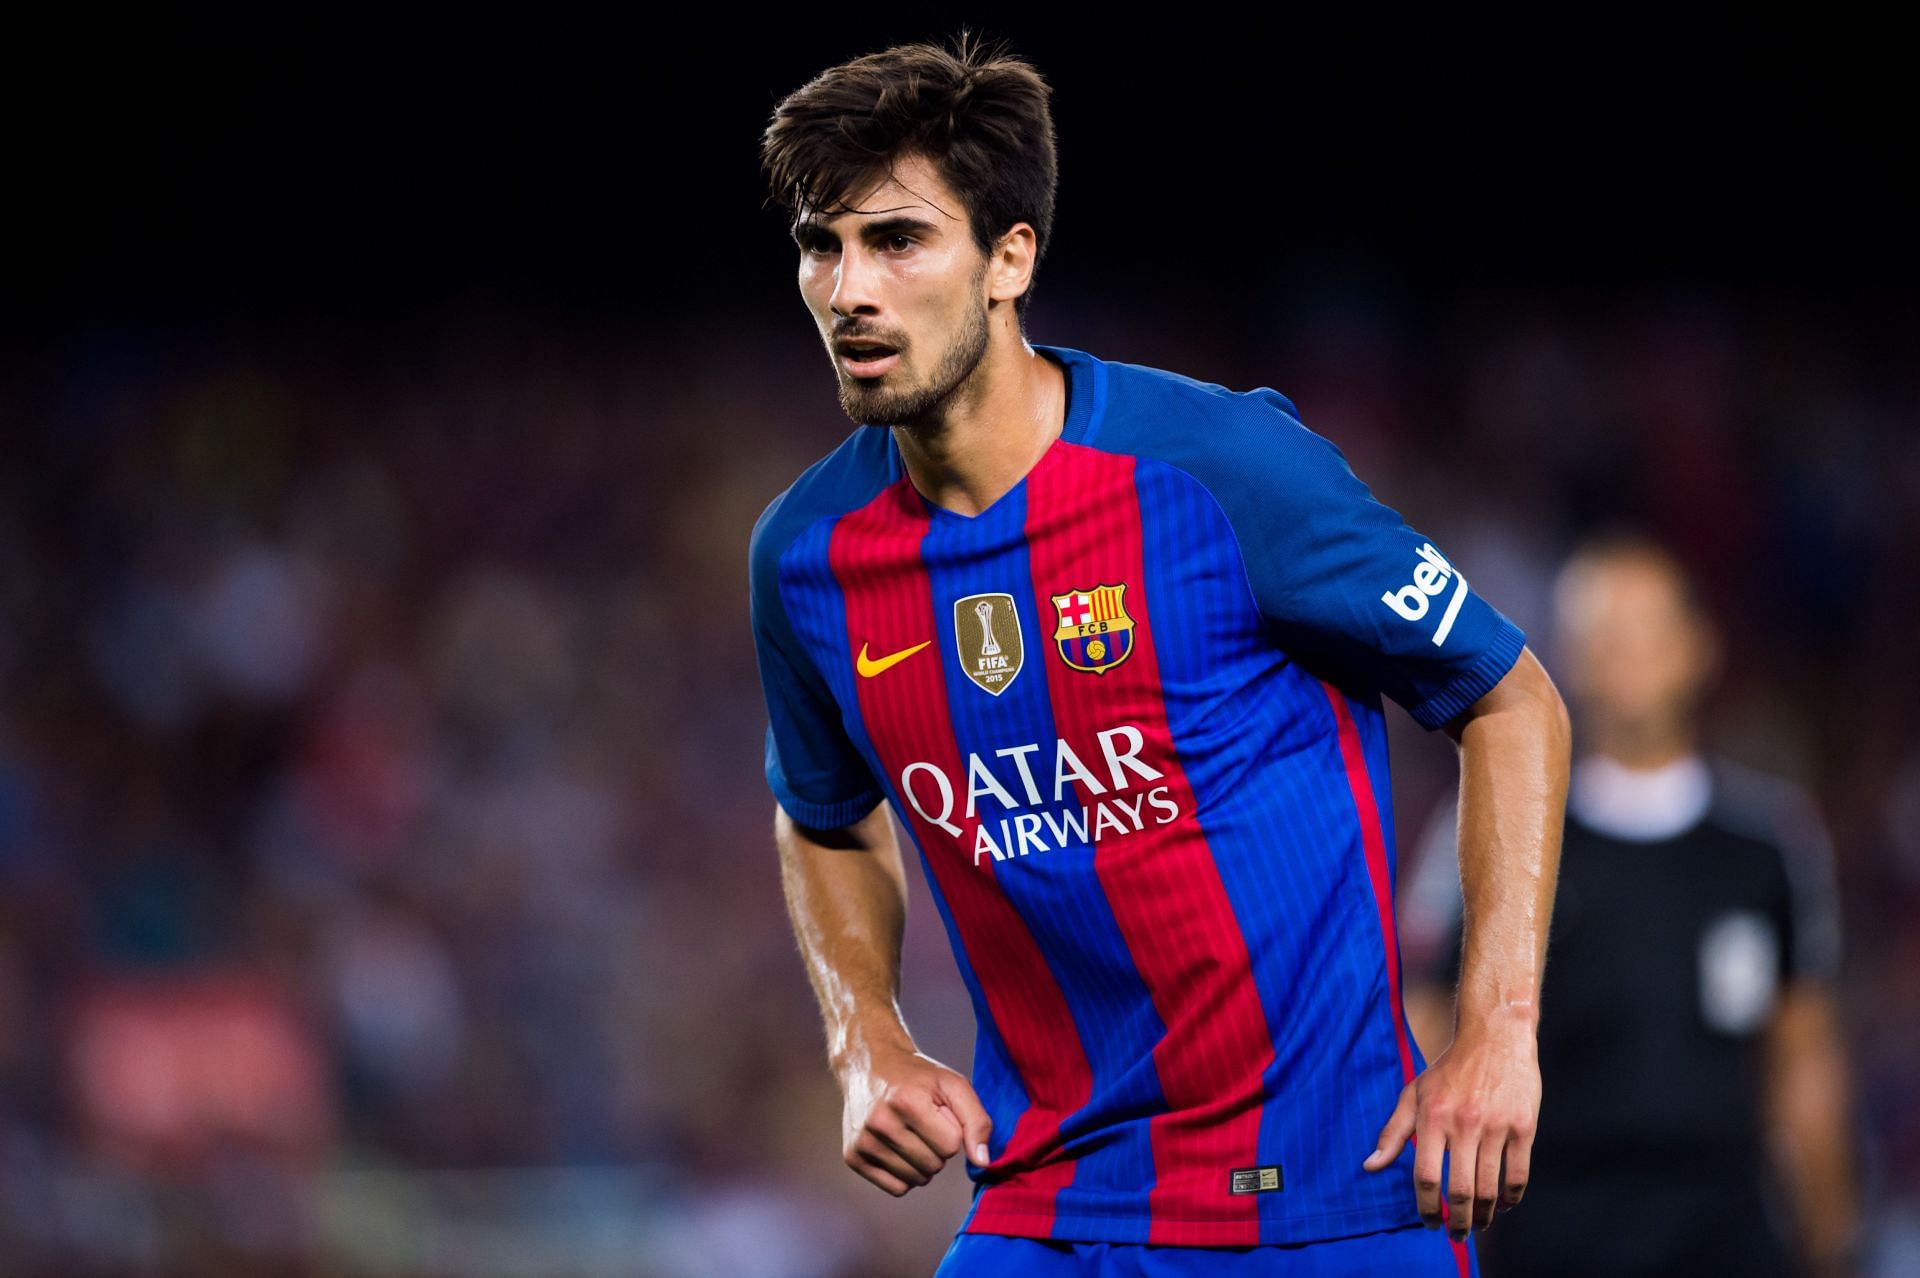 Gomes playing for Barcelona